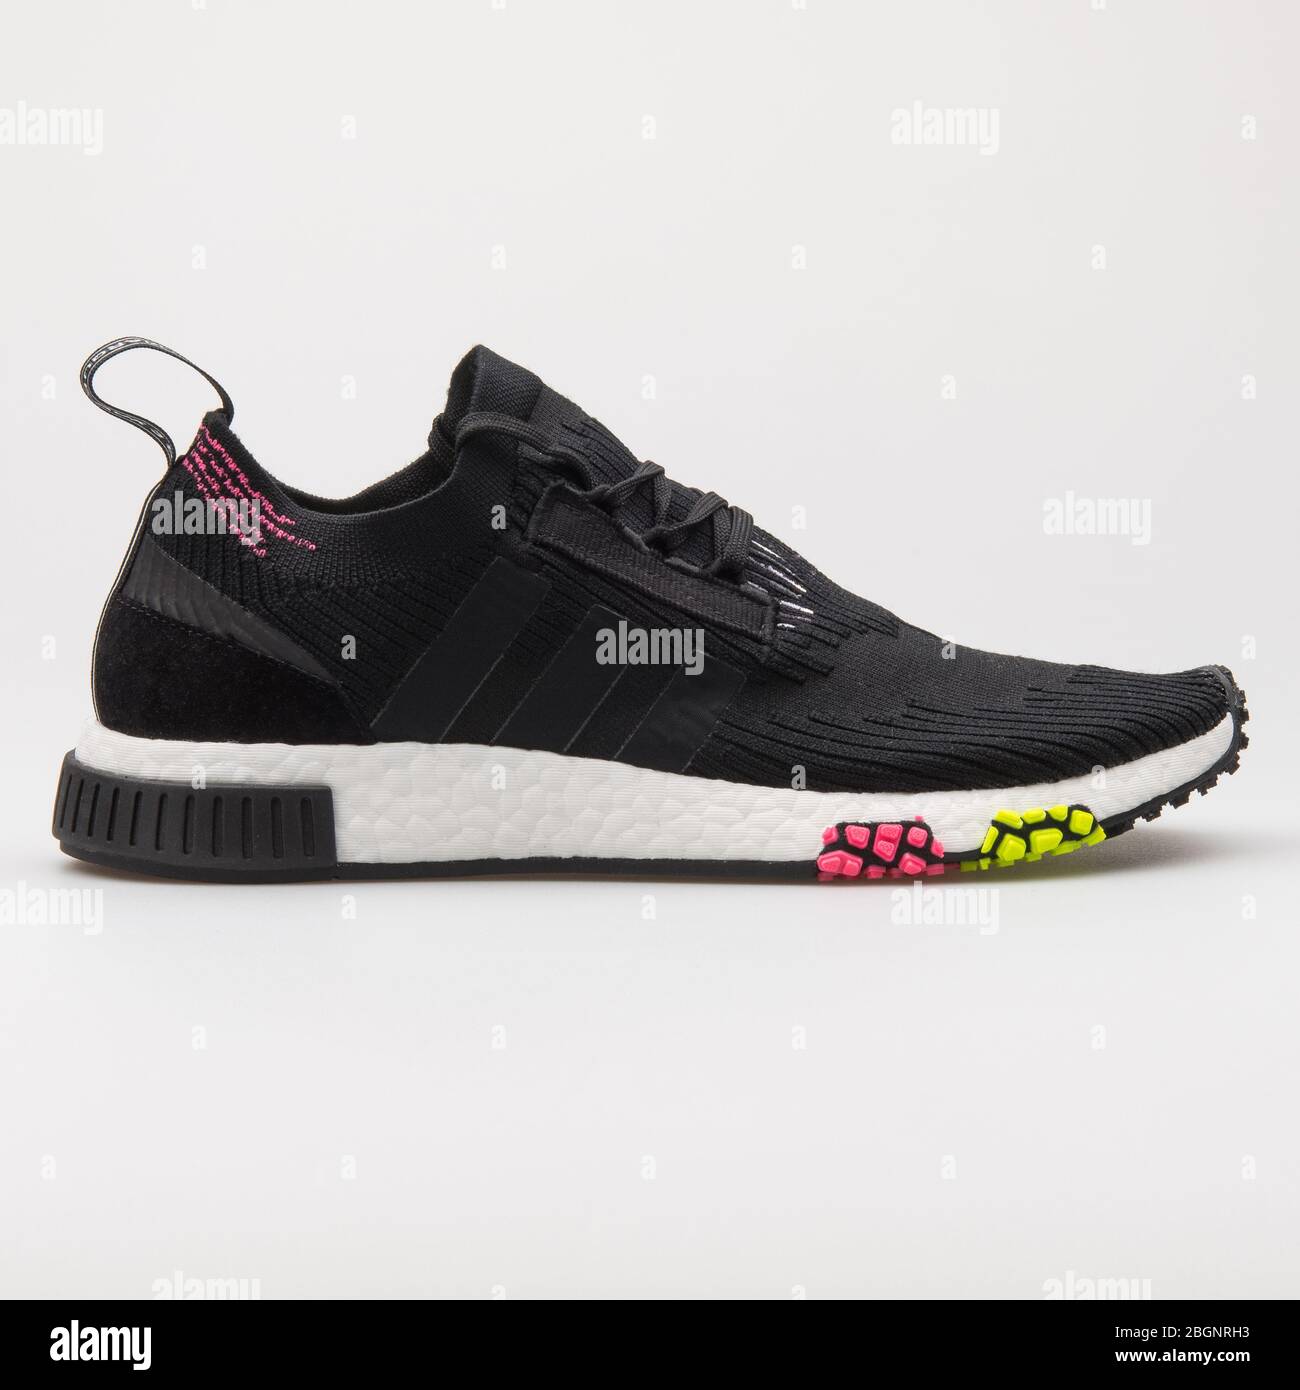 VIENNA, - 24, 2017: NMD Racer PK Primeknit Core black, pink and yellow sneaker on white background Stock Photo - Alamy